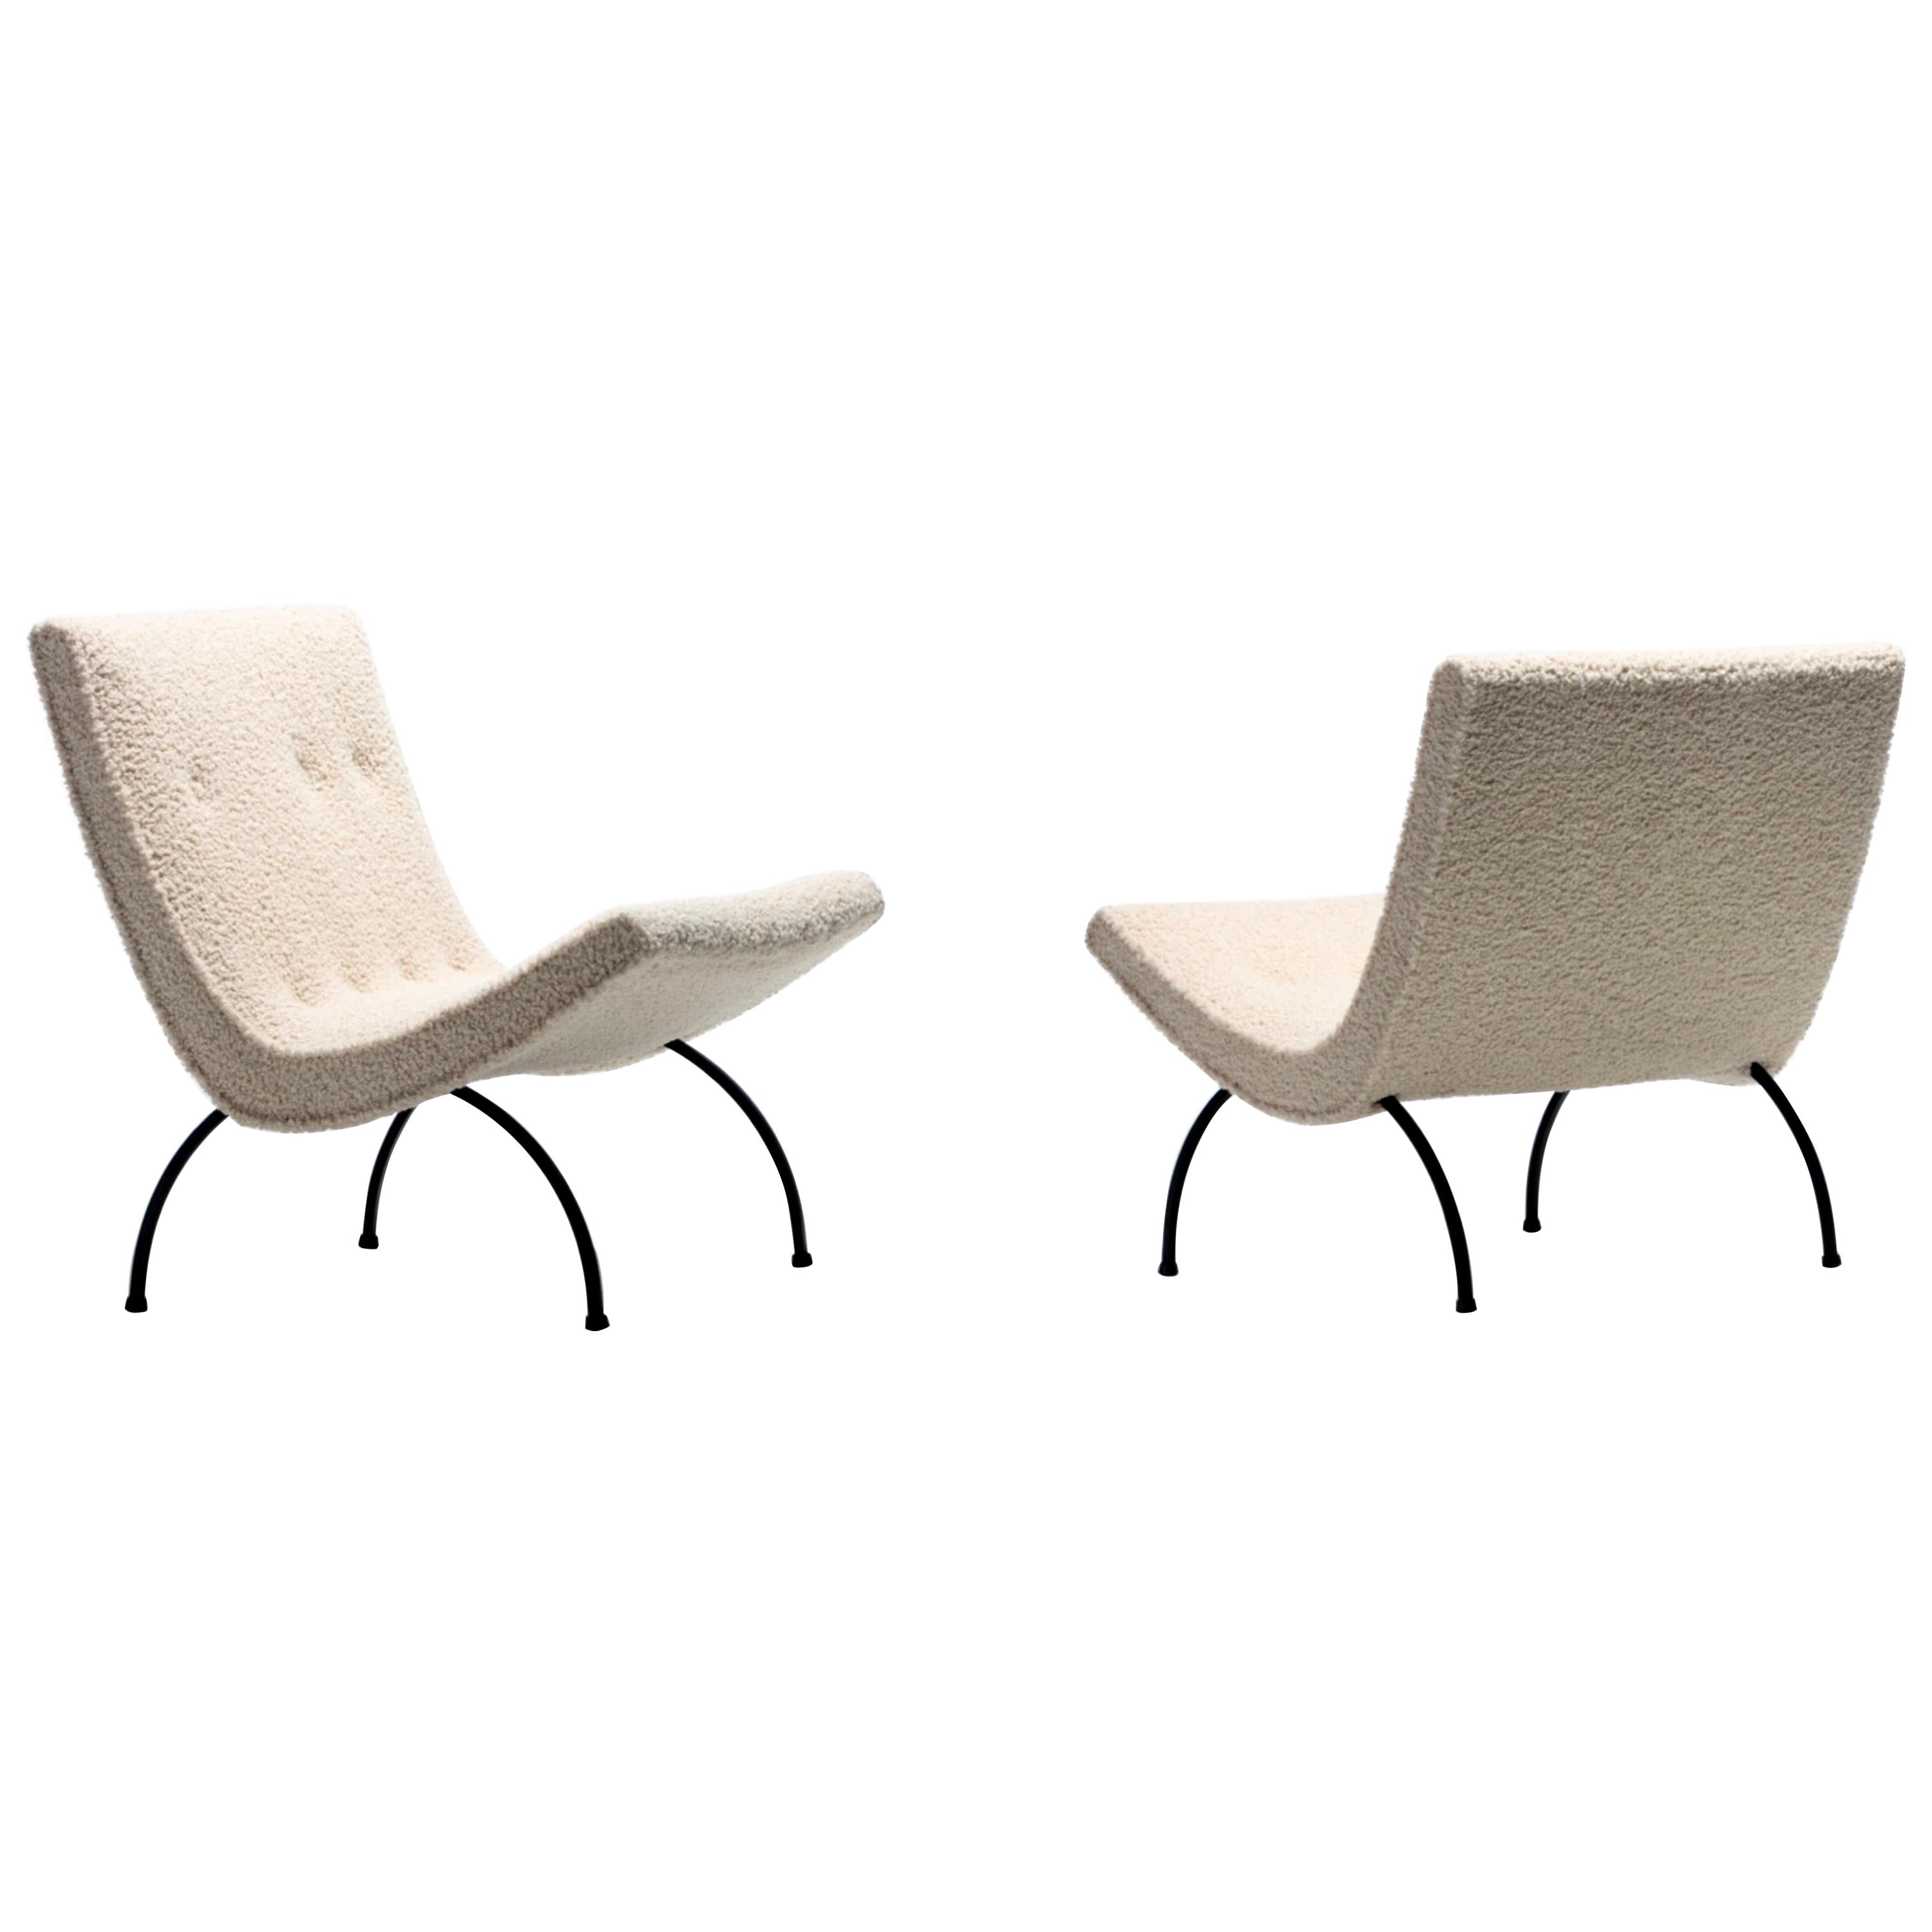 Pair of Milo Baughman Scoop Chairs in Ivory Bouclé with Iron Legs c. 1950s For Sale